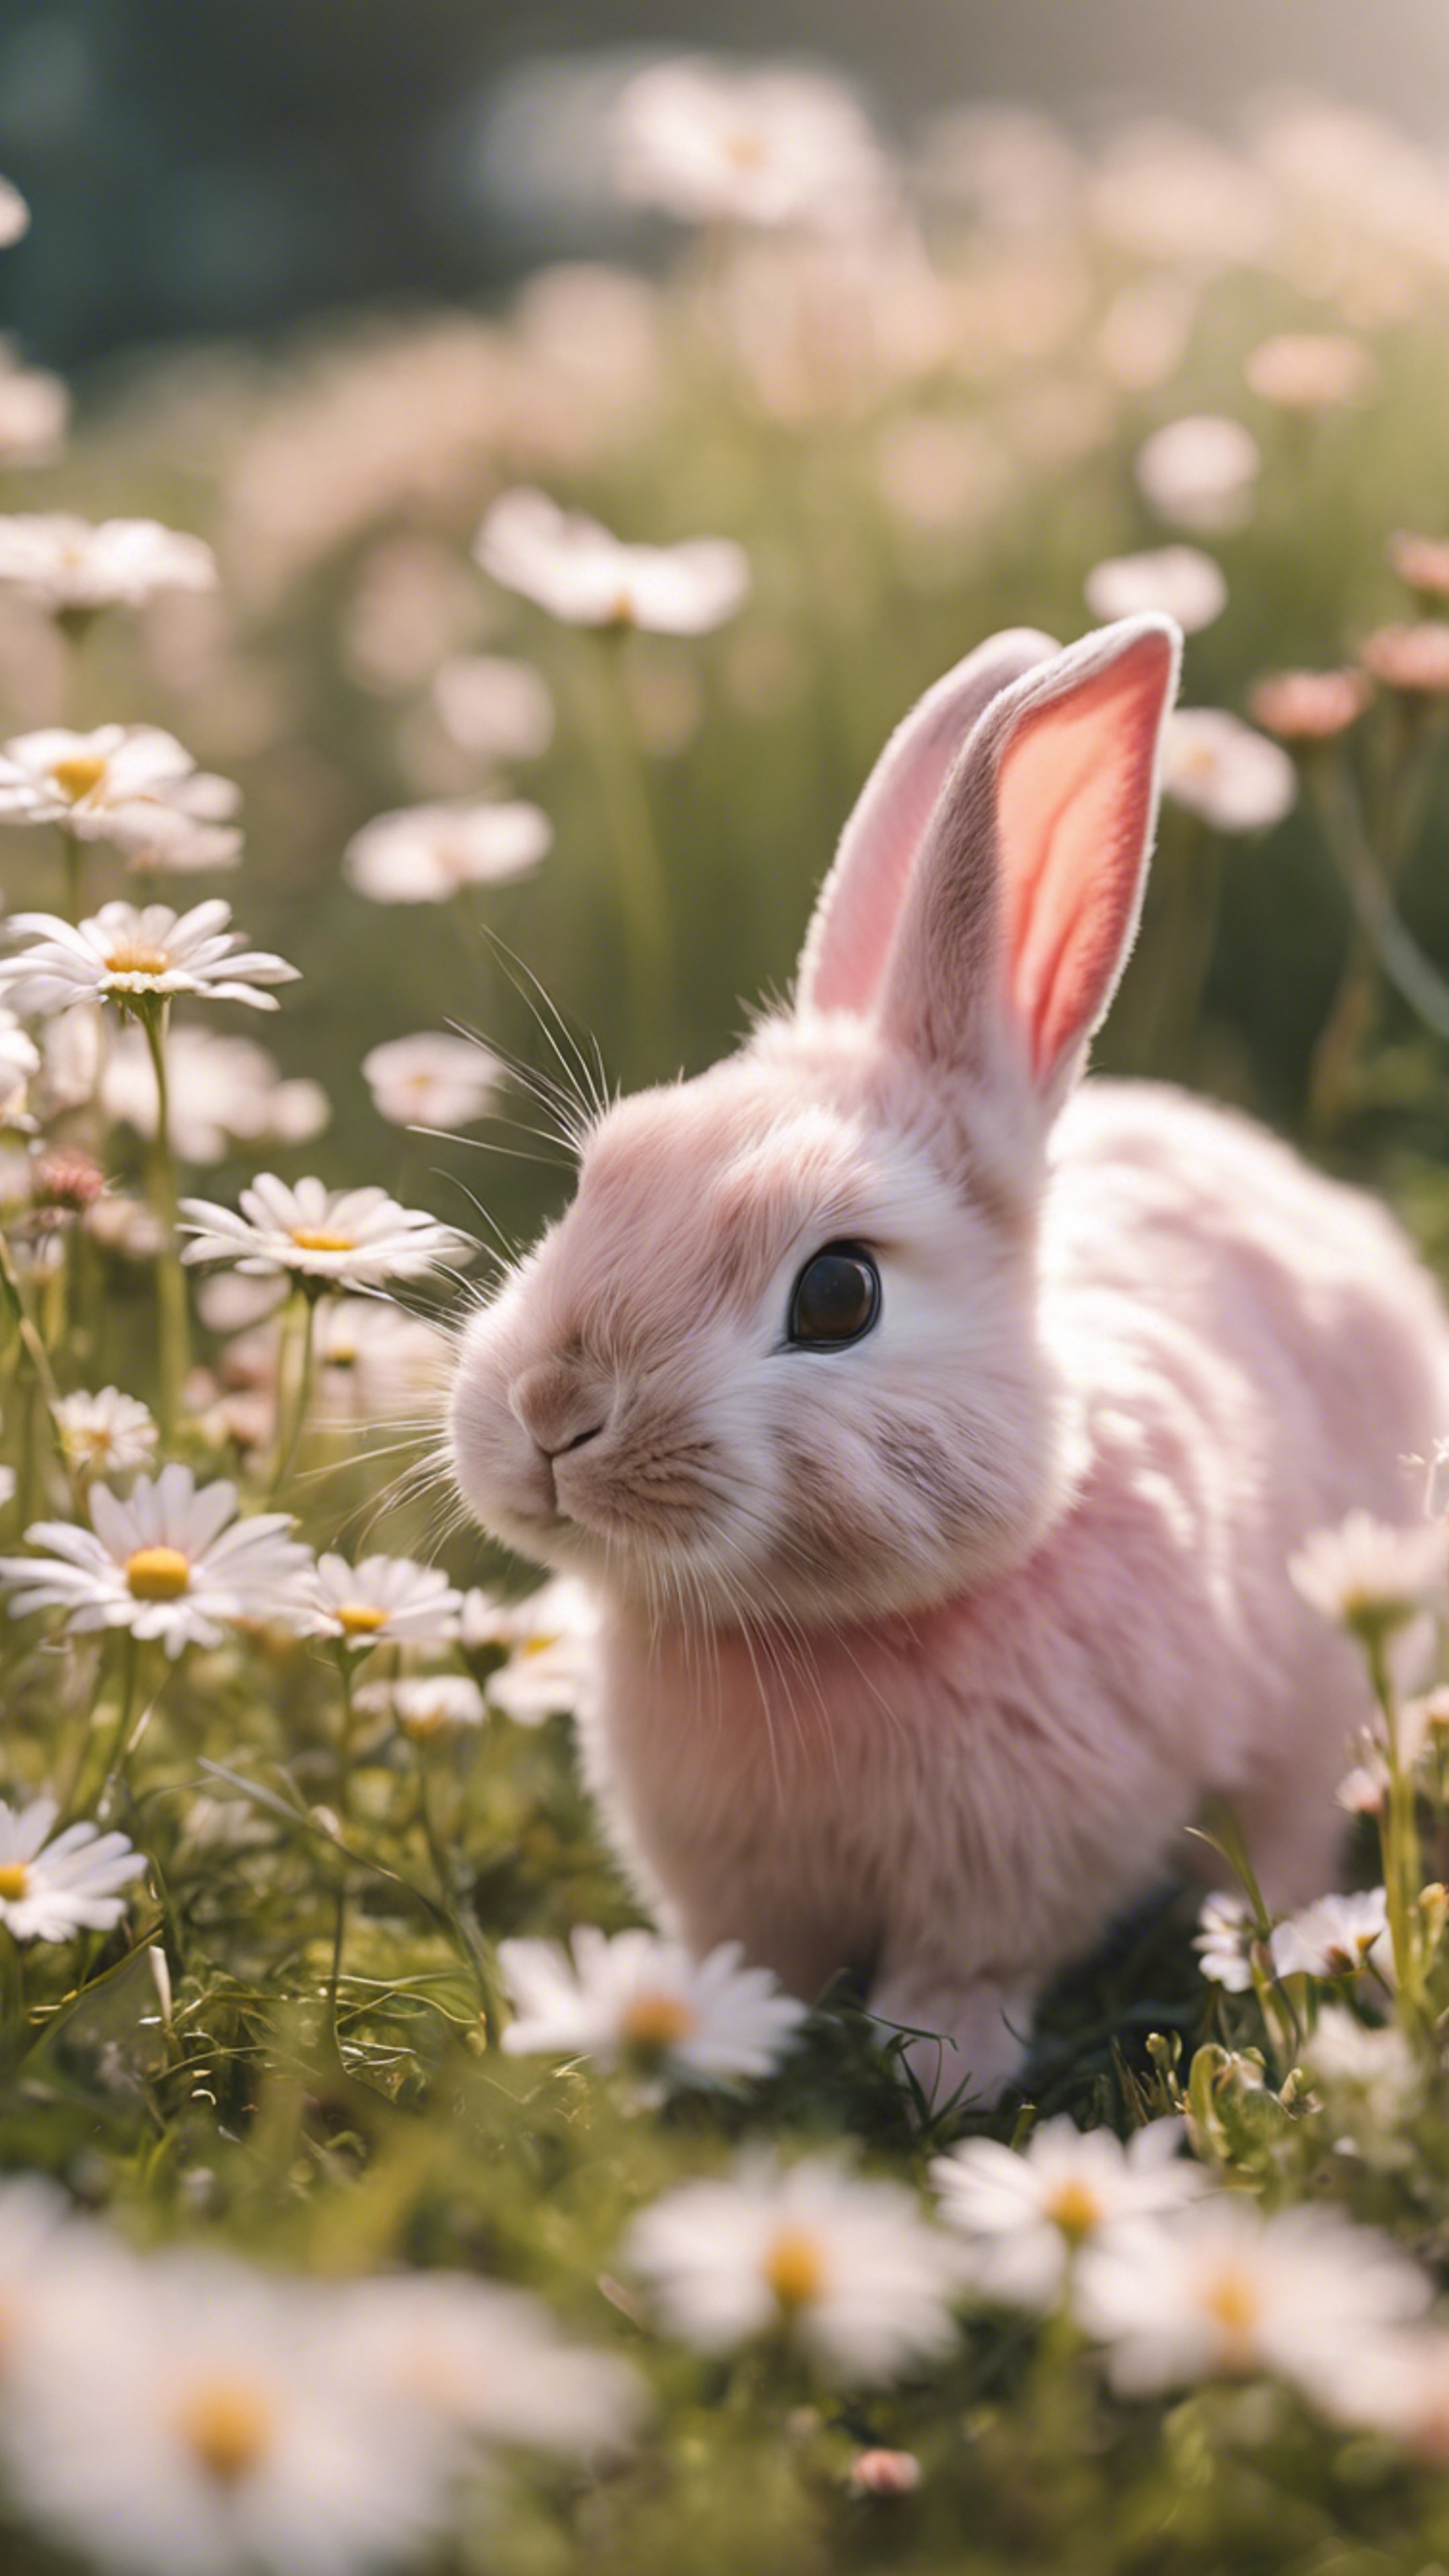 A pack of blush pink, Kawaii style rabbits happily playing in a field of daisies. Tapeta na zeď[cf36497c89454393a51d]